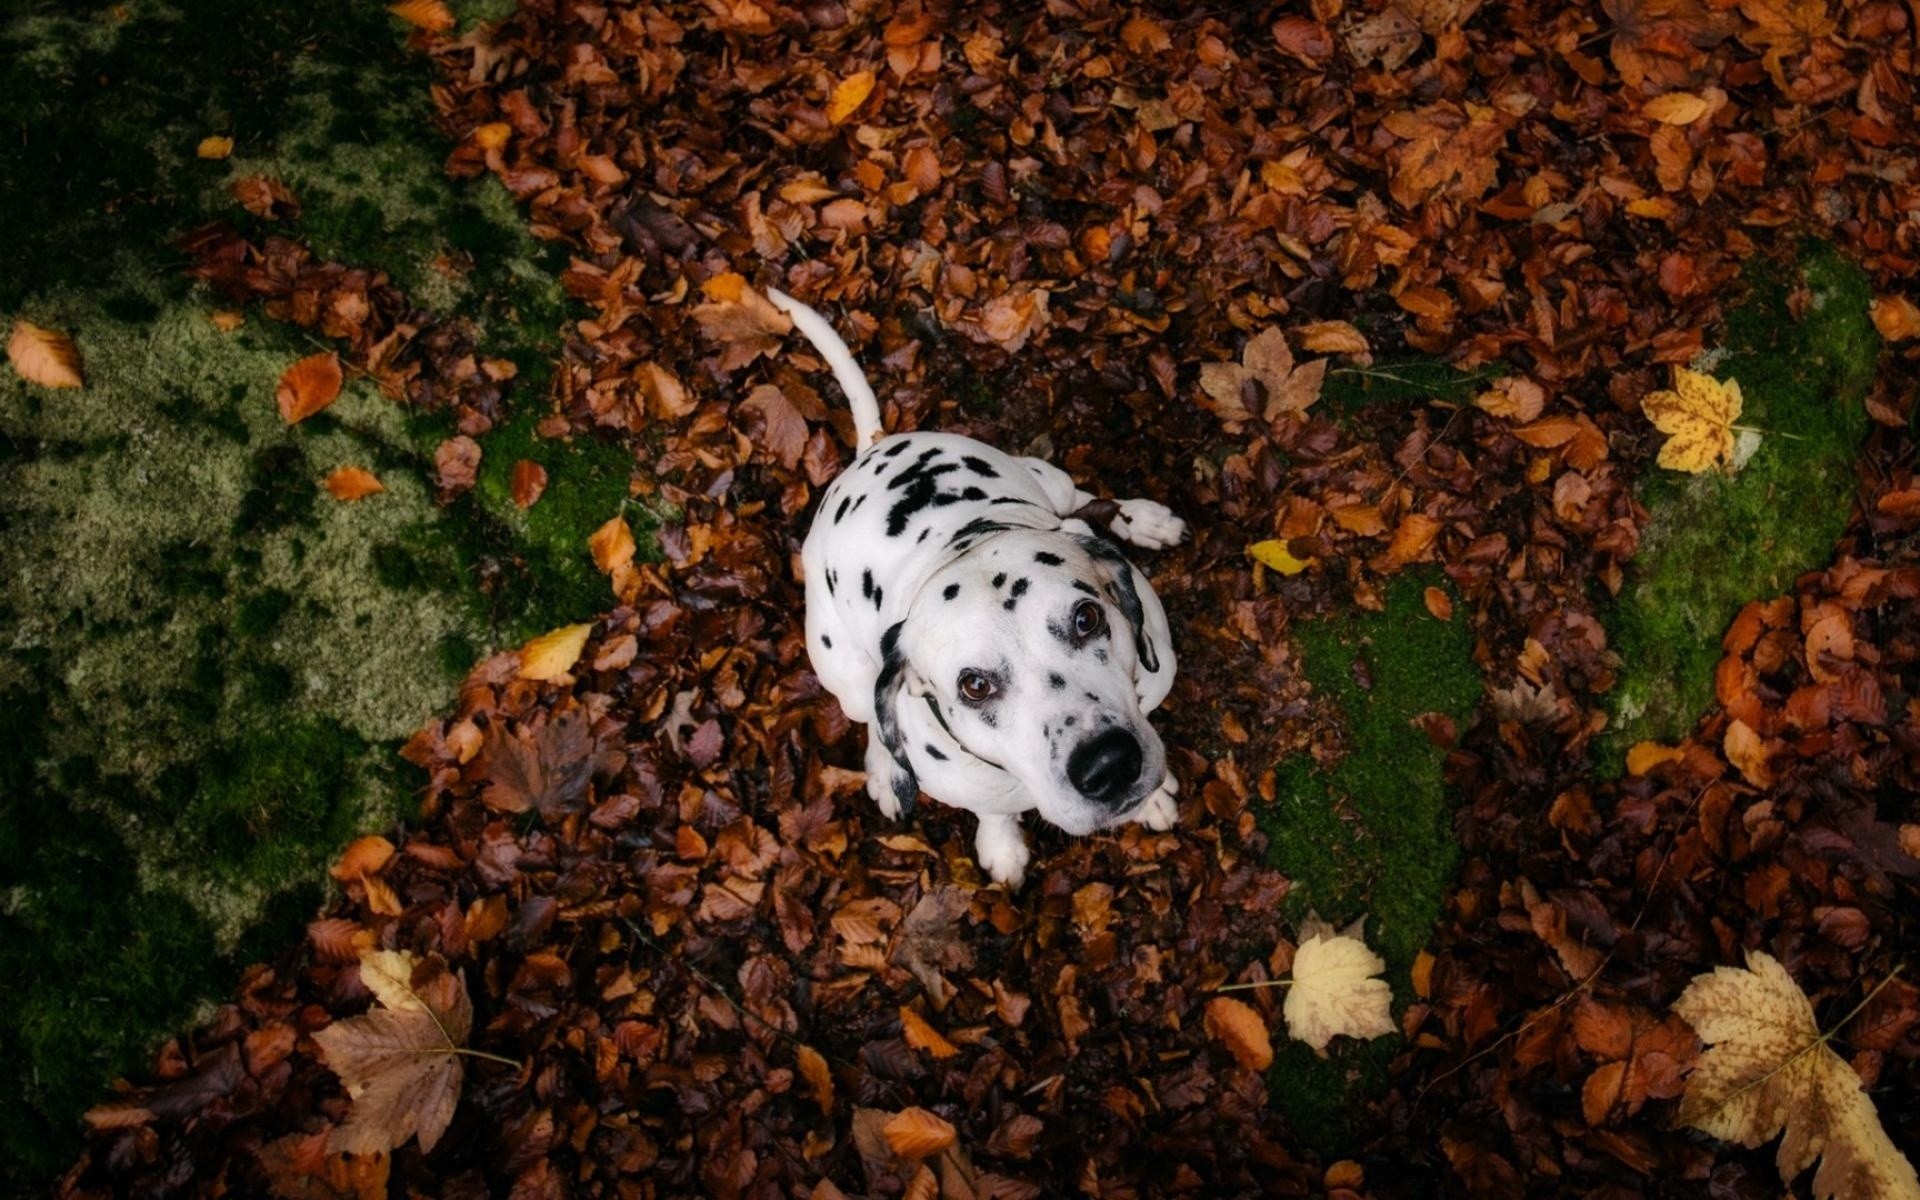 General 1920x1200 animals nature dog Dalmatian looking up mammals fallen leaves outdoors